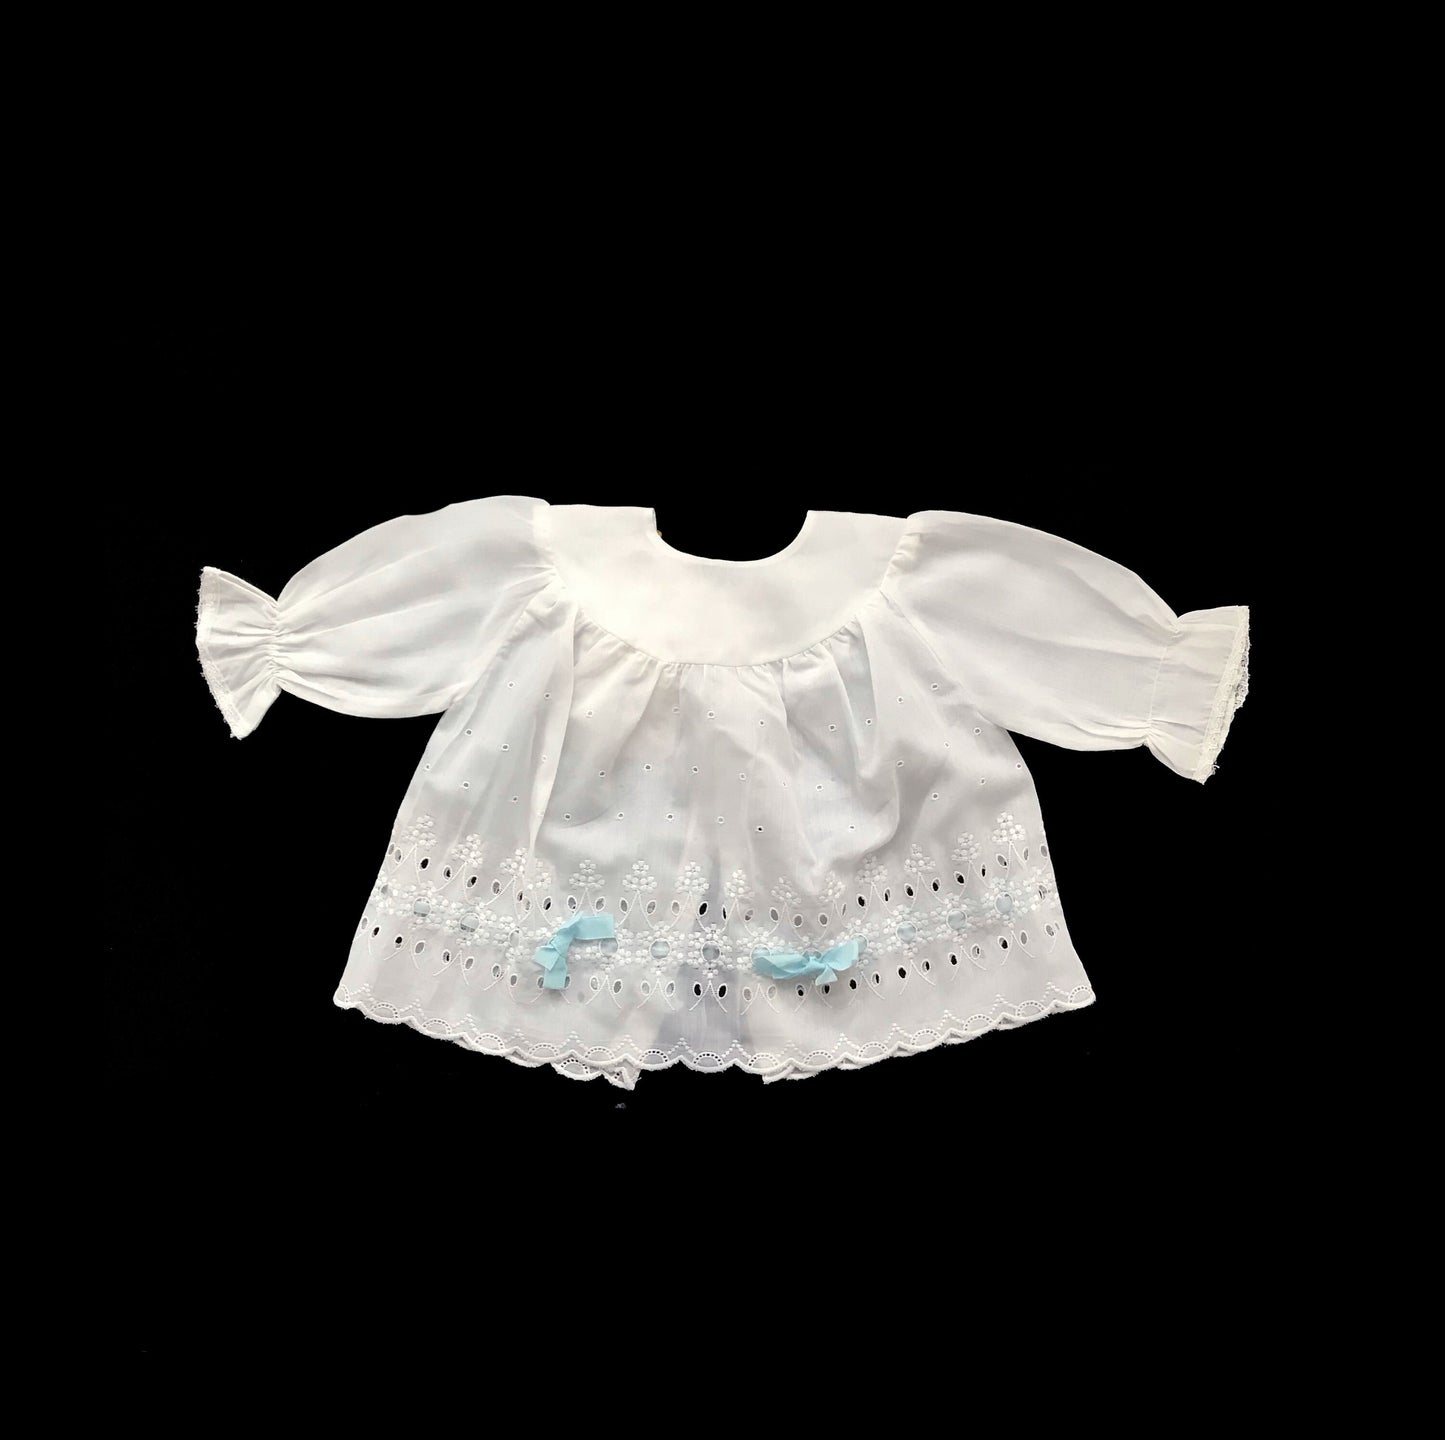 Vintage 60's "Broderie Anglaise" Blue Ribbon Embroidered White Shirt/ Top / Blouse Made in France 0-3 Months